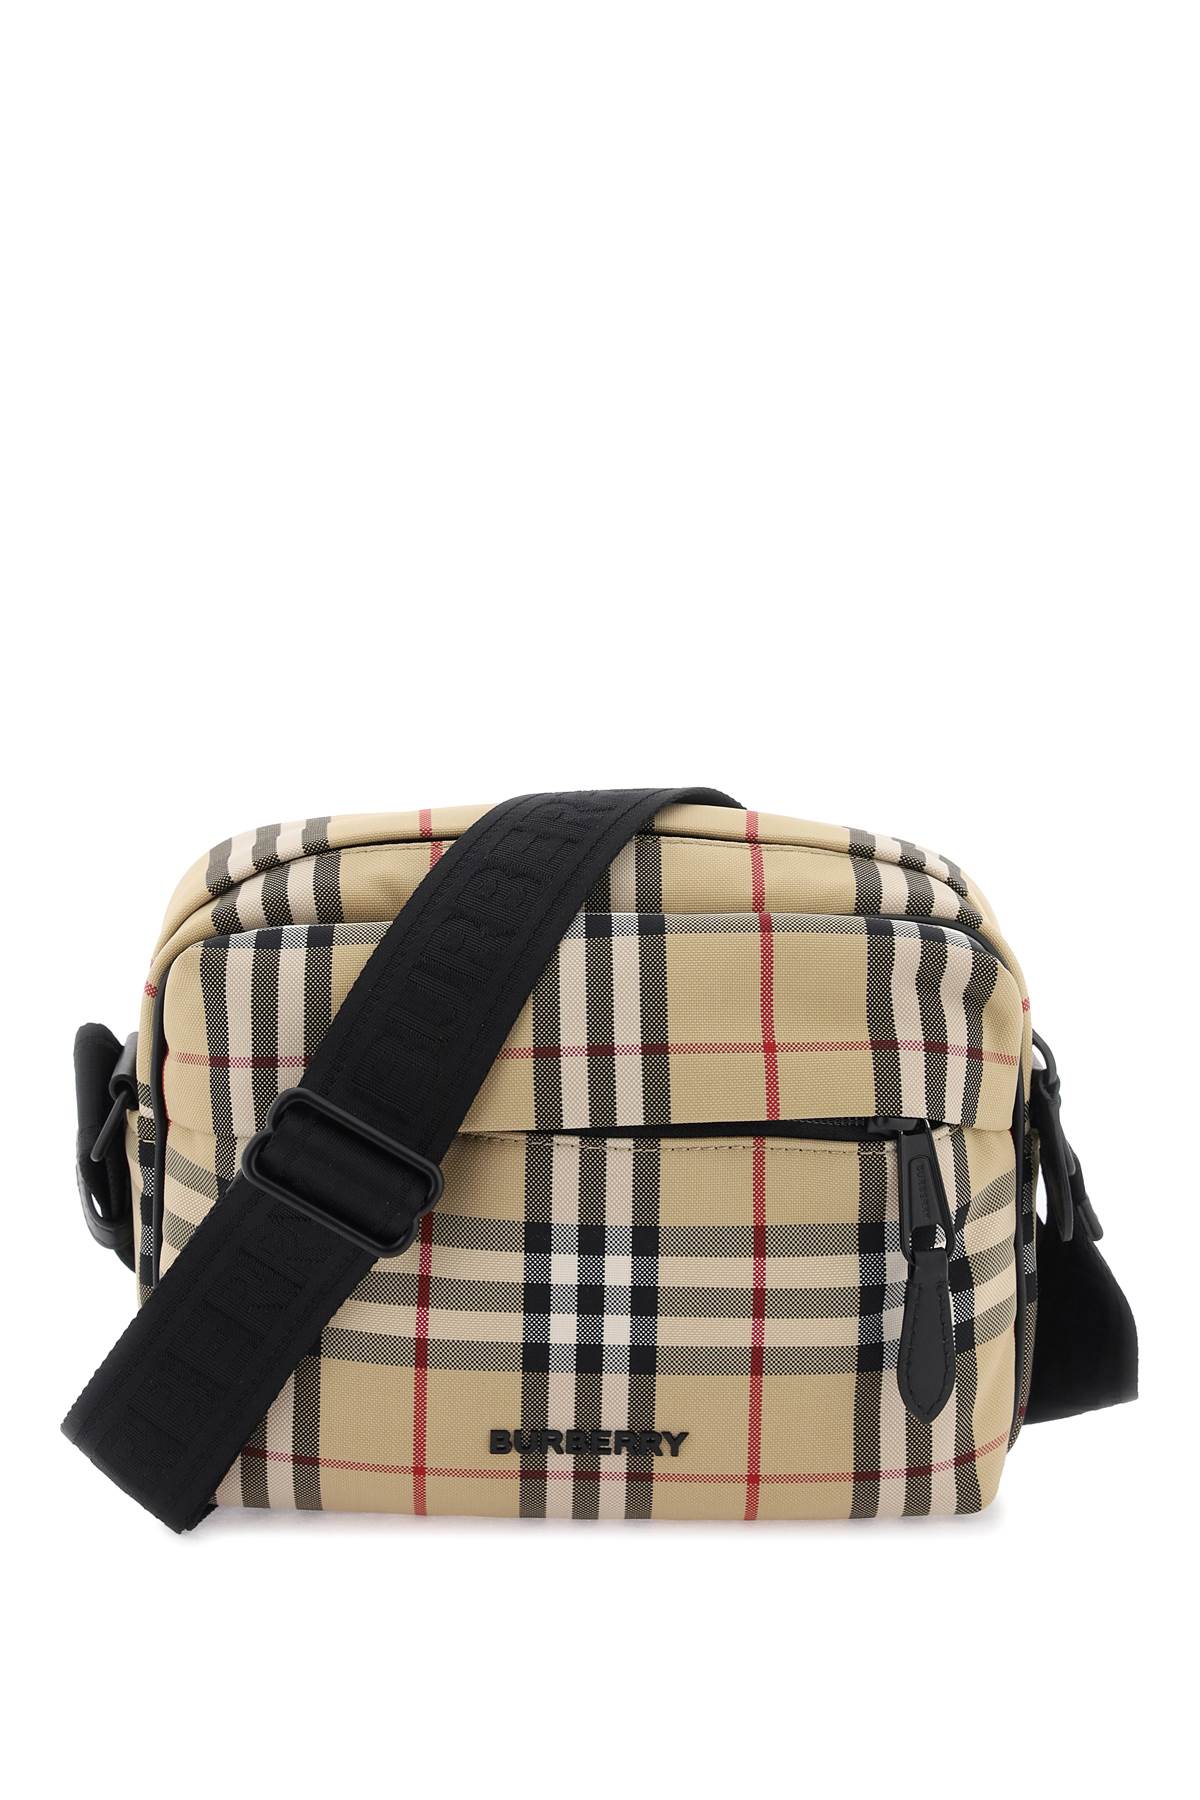 Burberry check paddy crossbody bag 8069760 ARCHIVE BEIGE